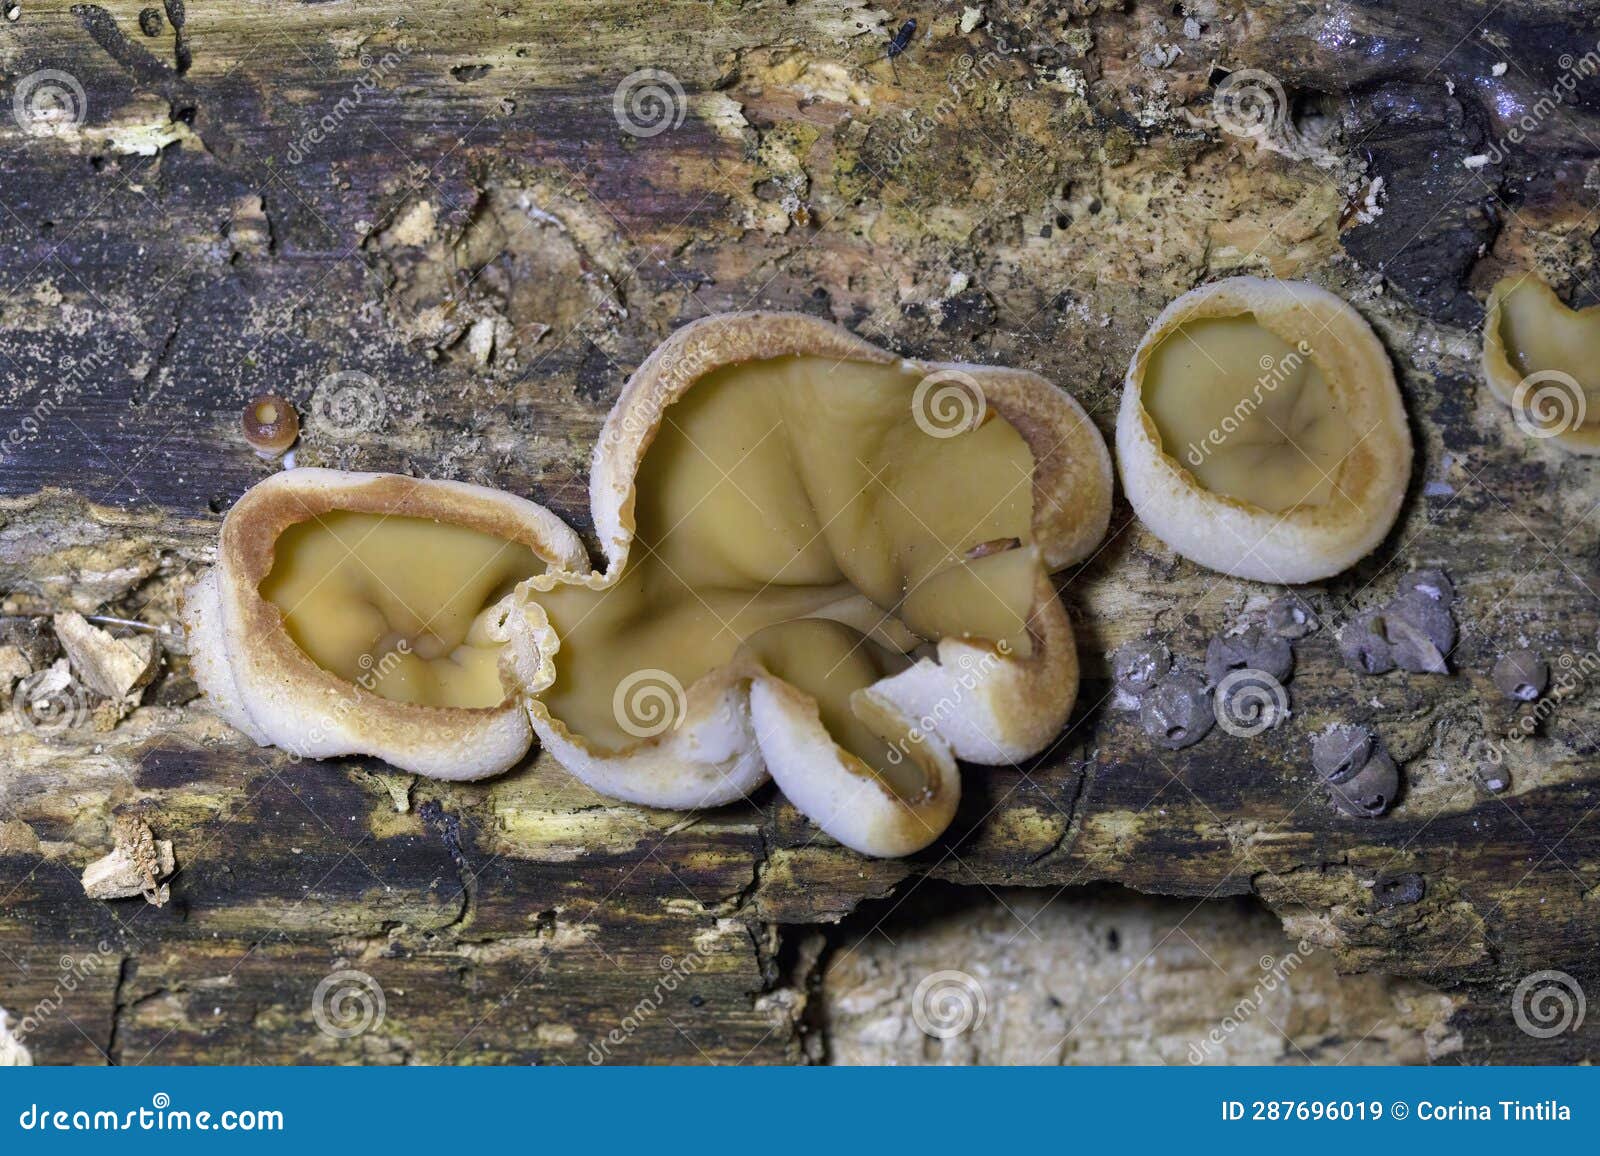 peziza domiciliana, commonly known as the domicile cup fungus, is a species of fungus in the genus peziza,